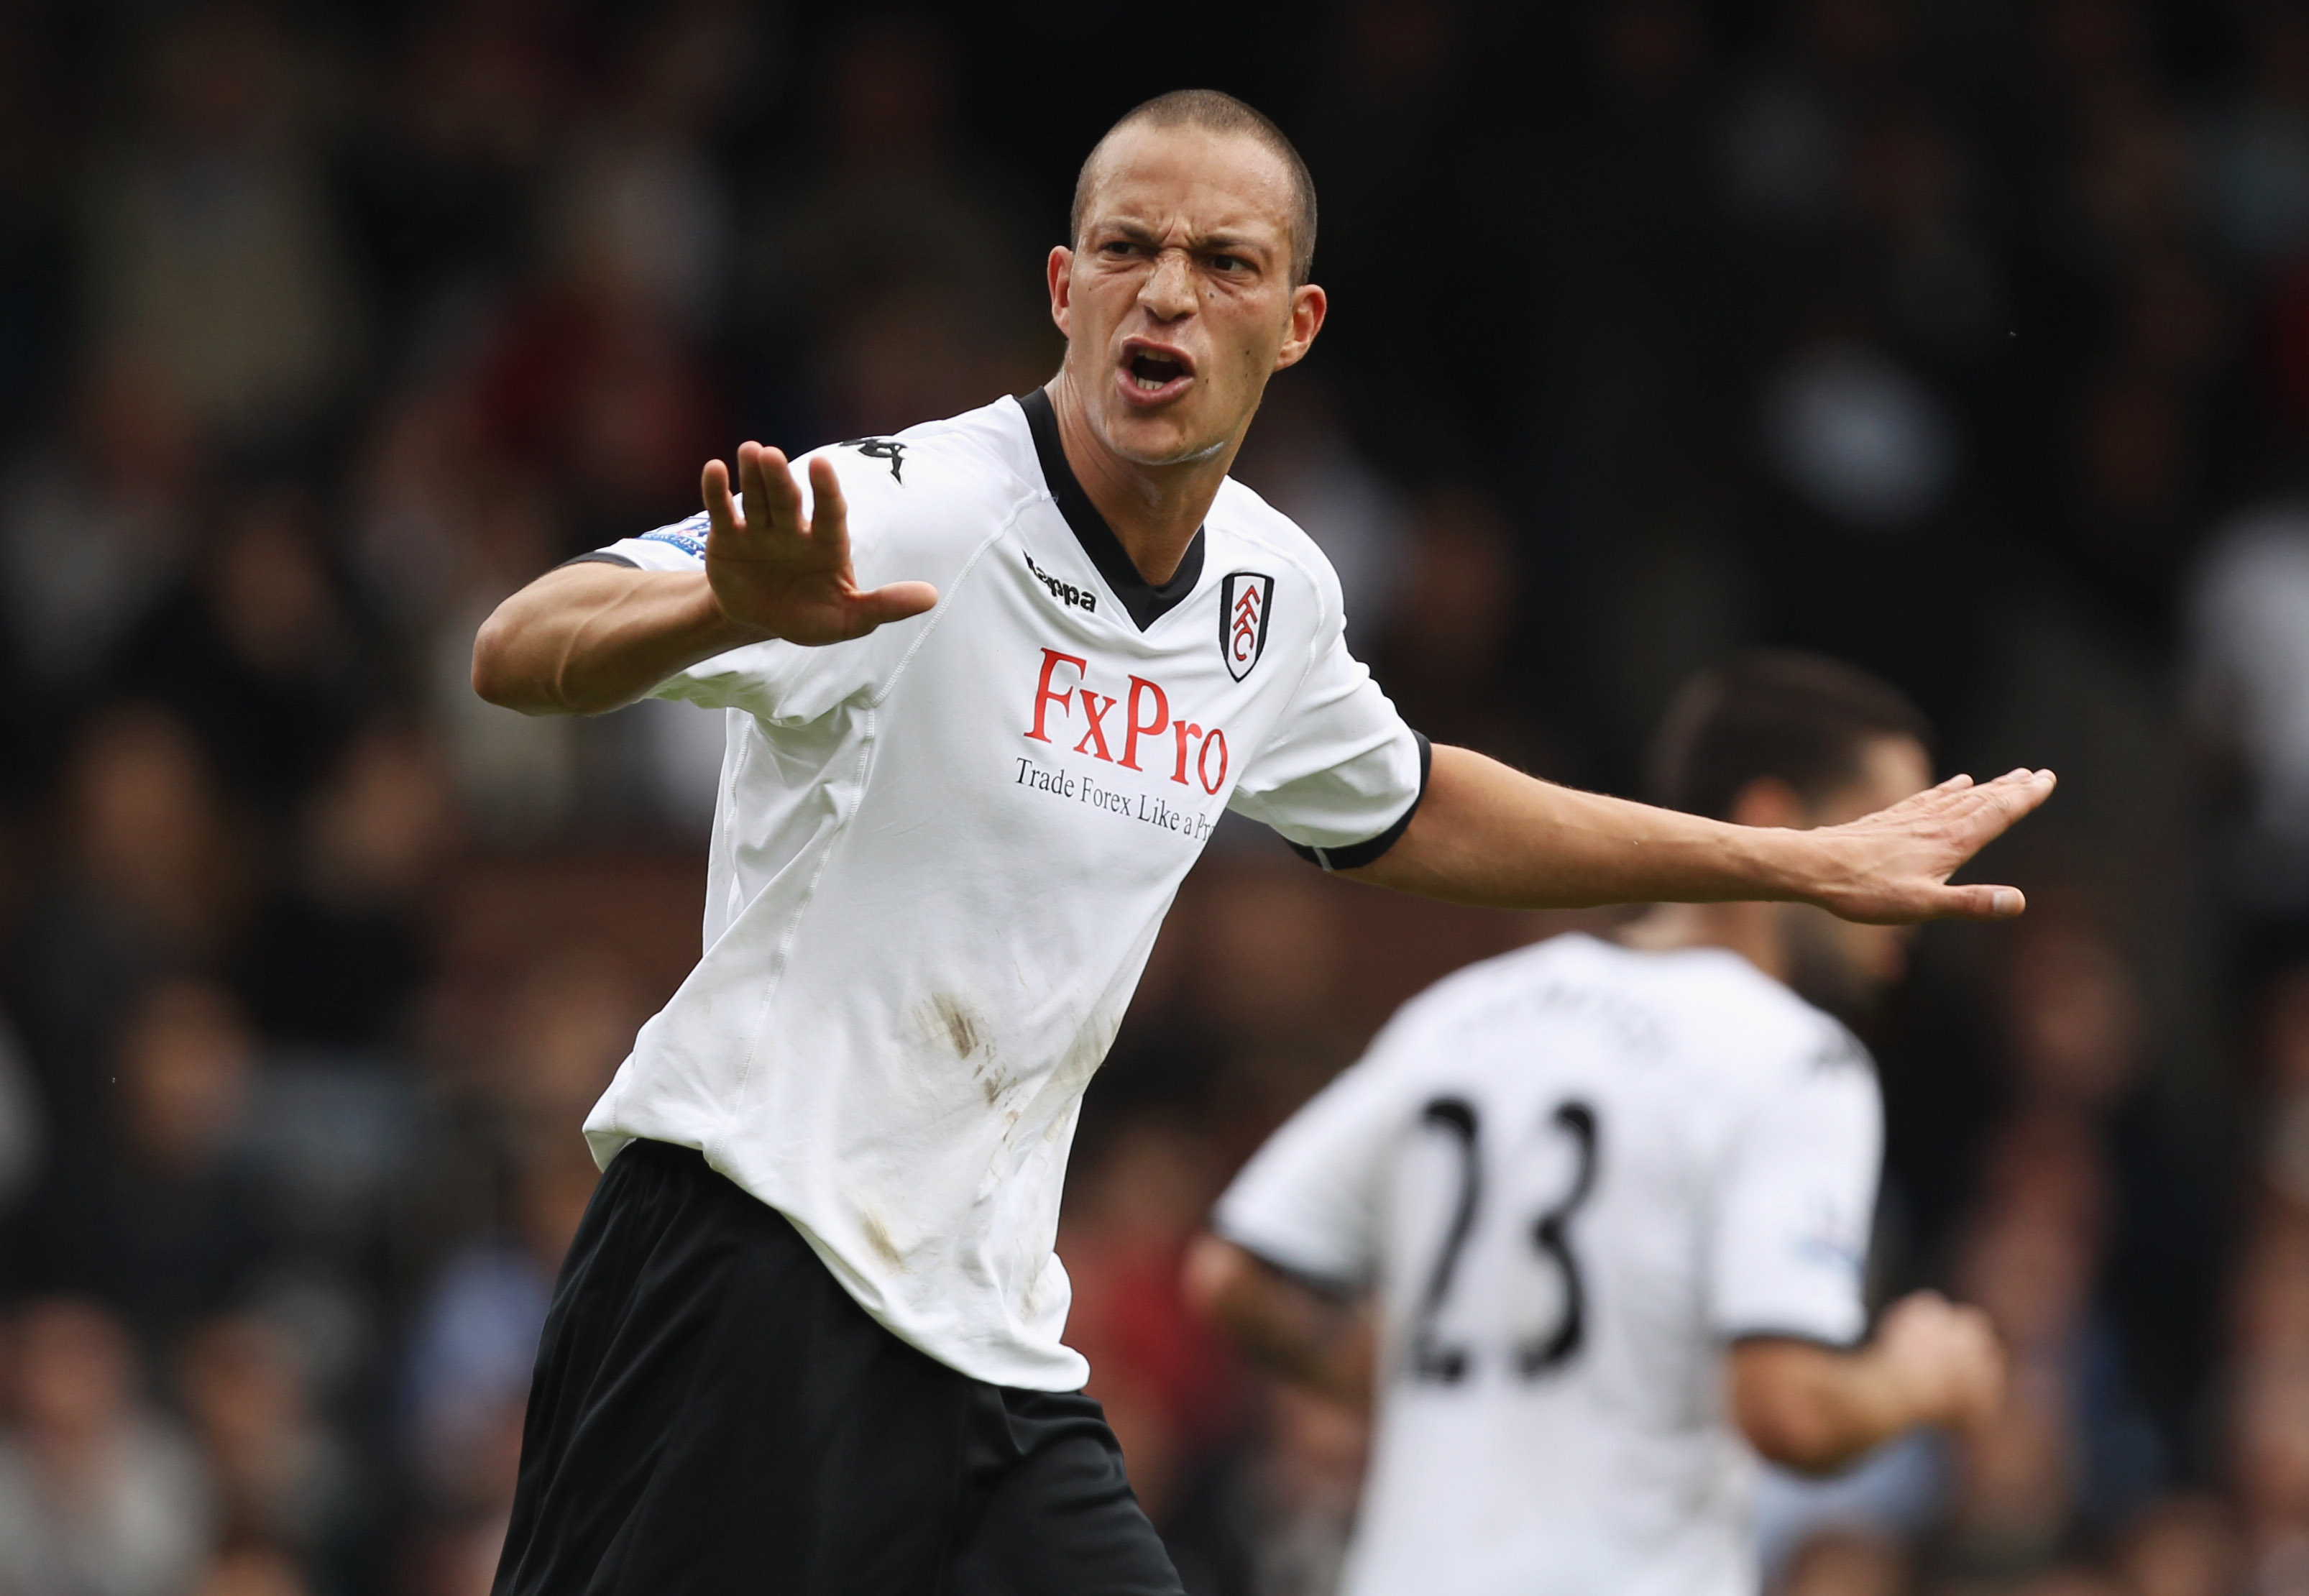 LONDON, ENGLAND - APRIL 03:  Bobby Zamora of Fulham gestures during the Barclays Premier League match between Fulham and Blackpool at Craven Cottage on April 3, 2011 in London, England.  (Photo by Ian Walton/Getty Images)